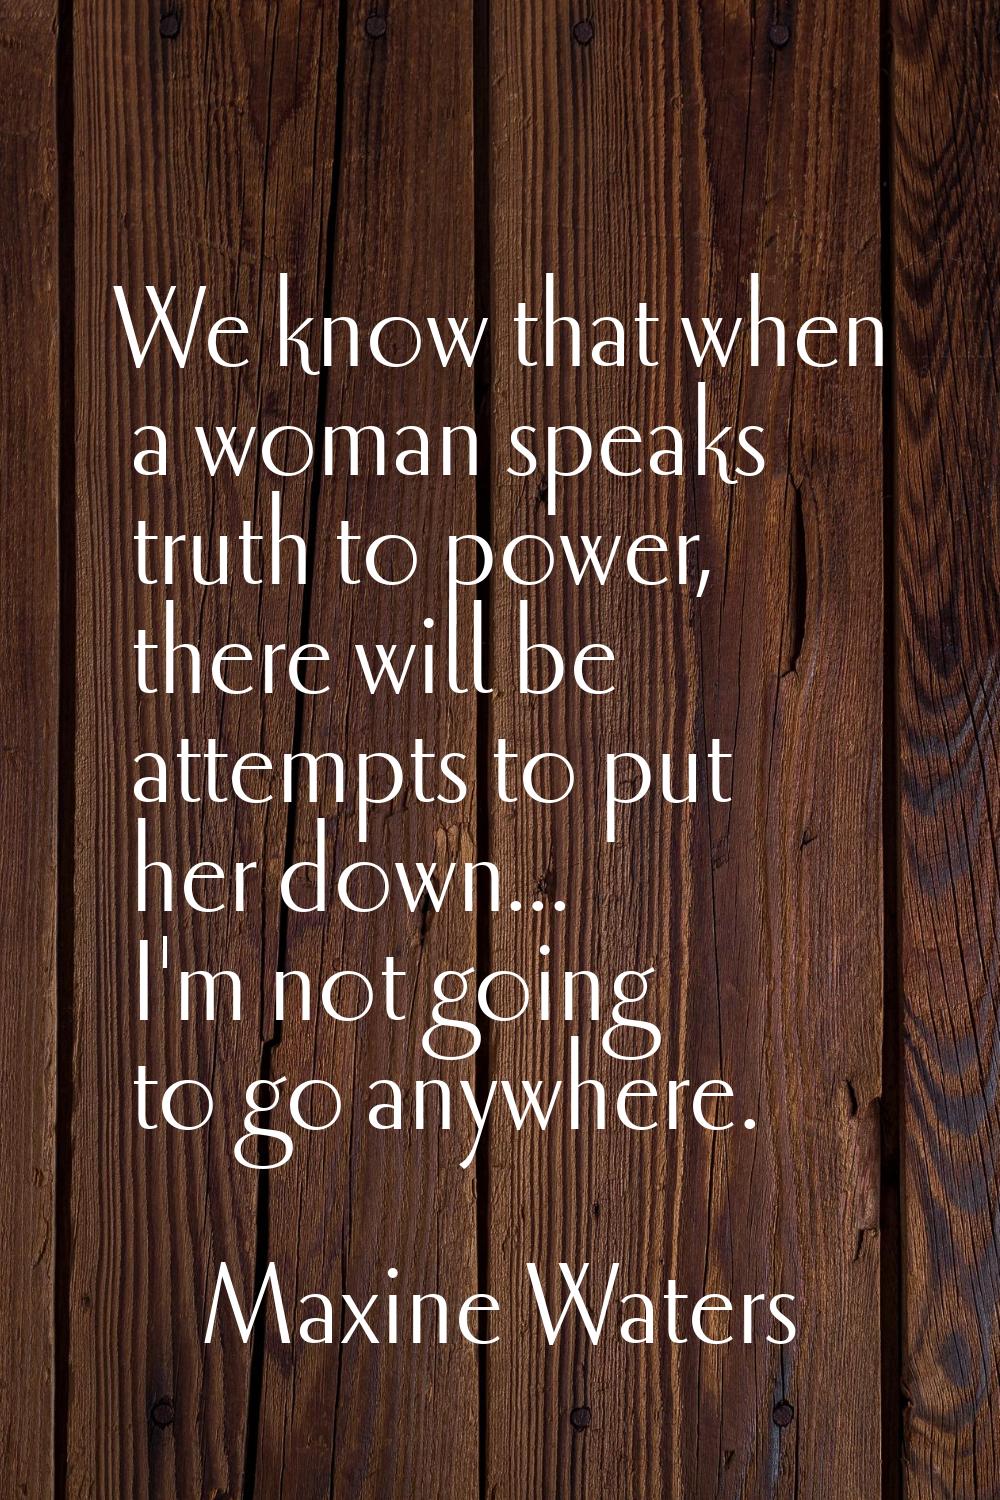 We know that when a woman speaks truth to power, there will be attempts to put her down... I'm not 